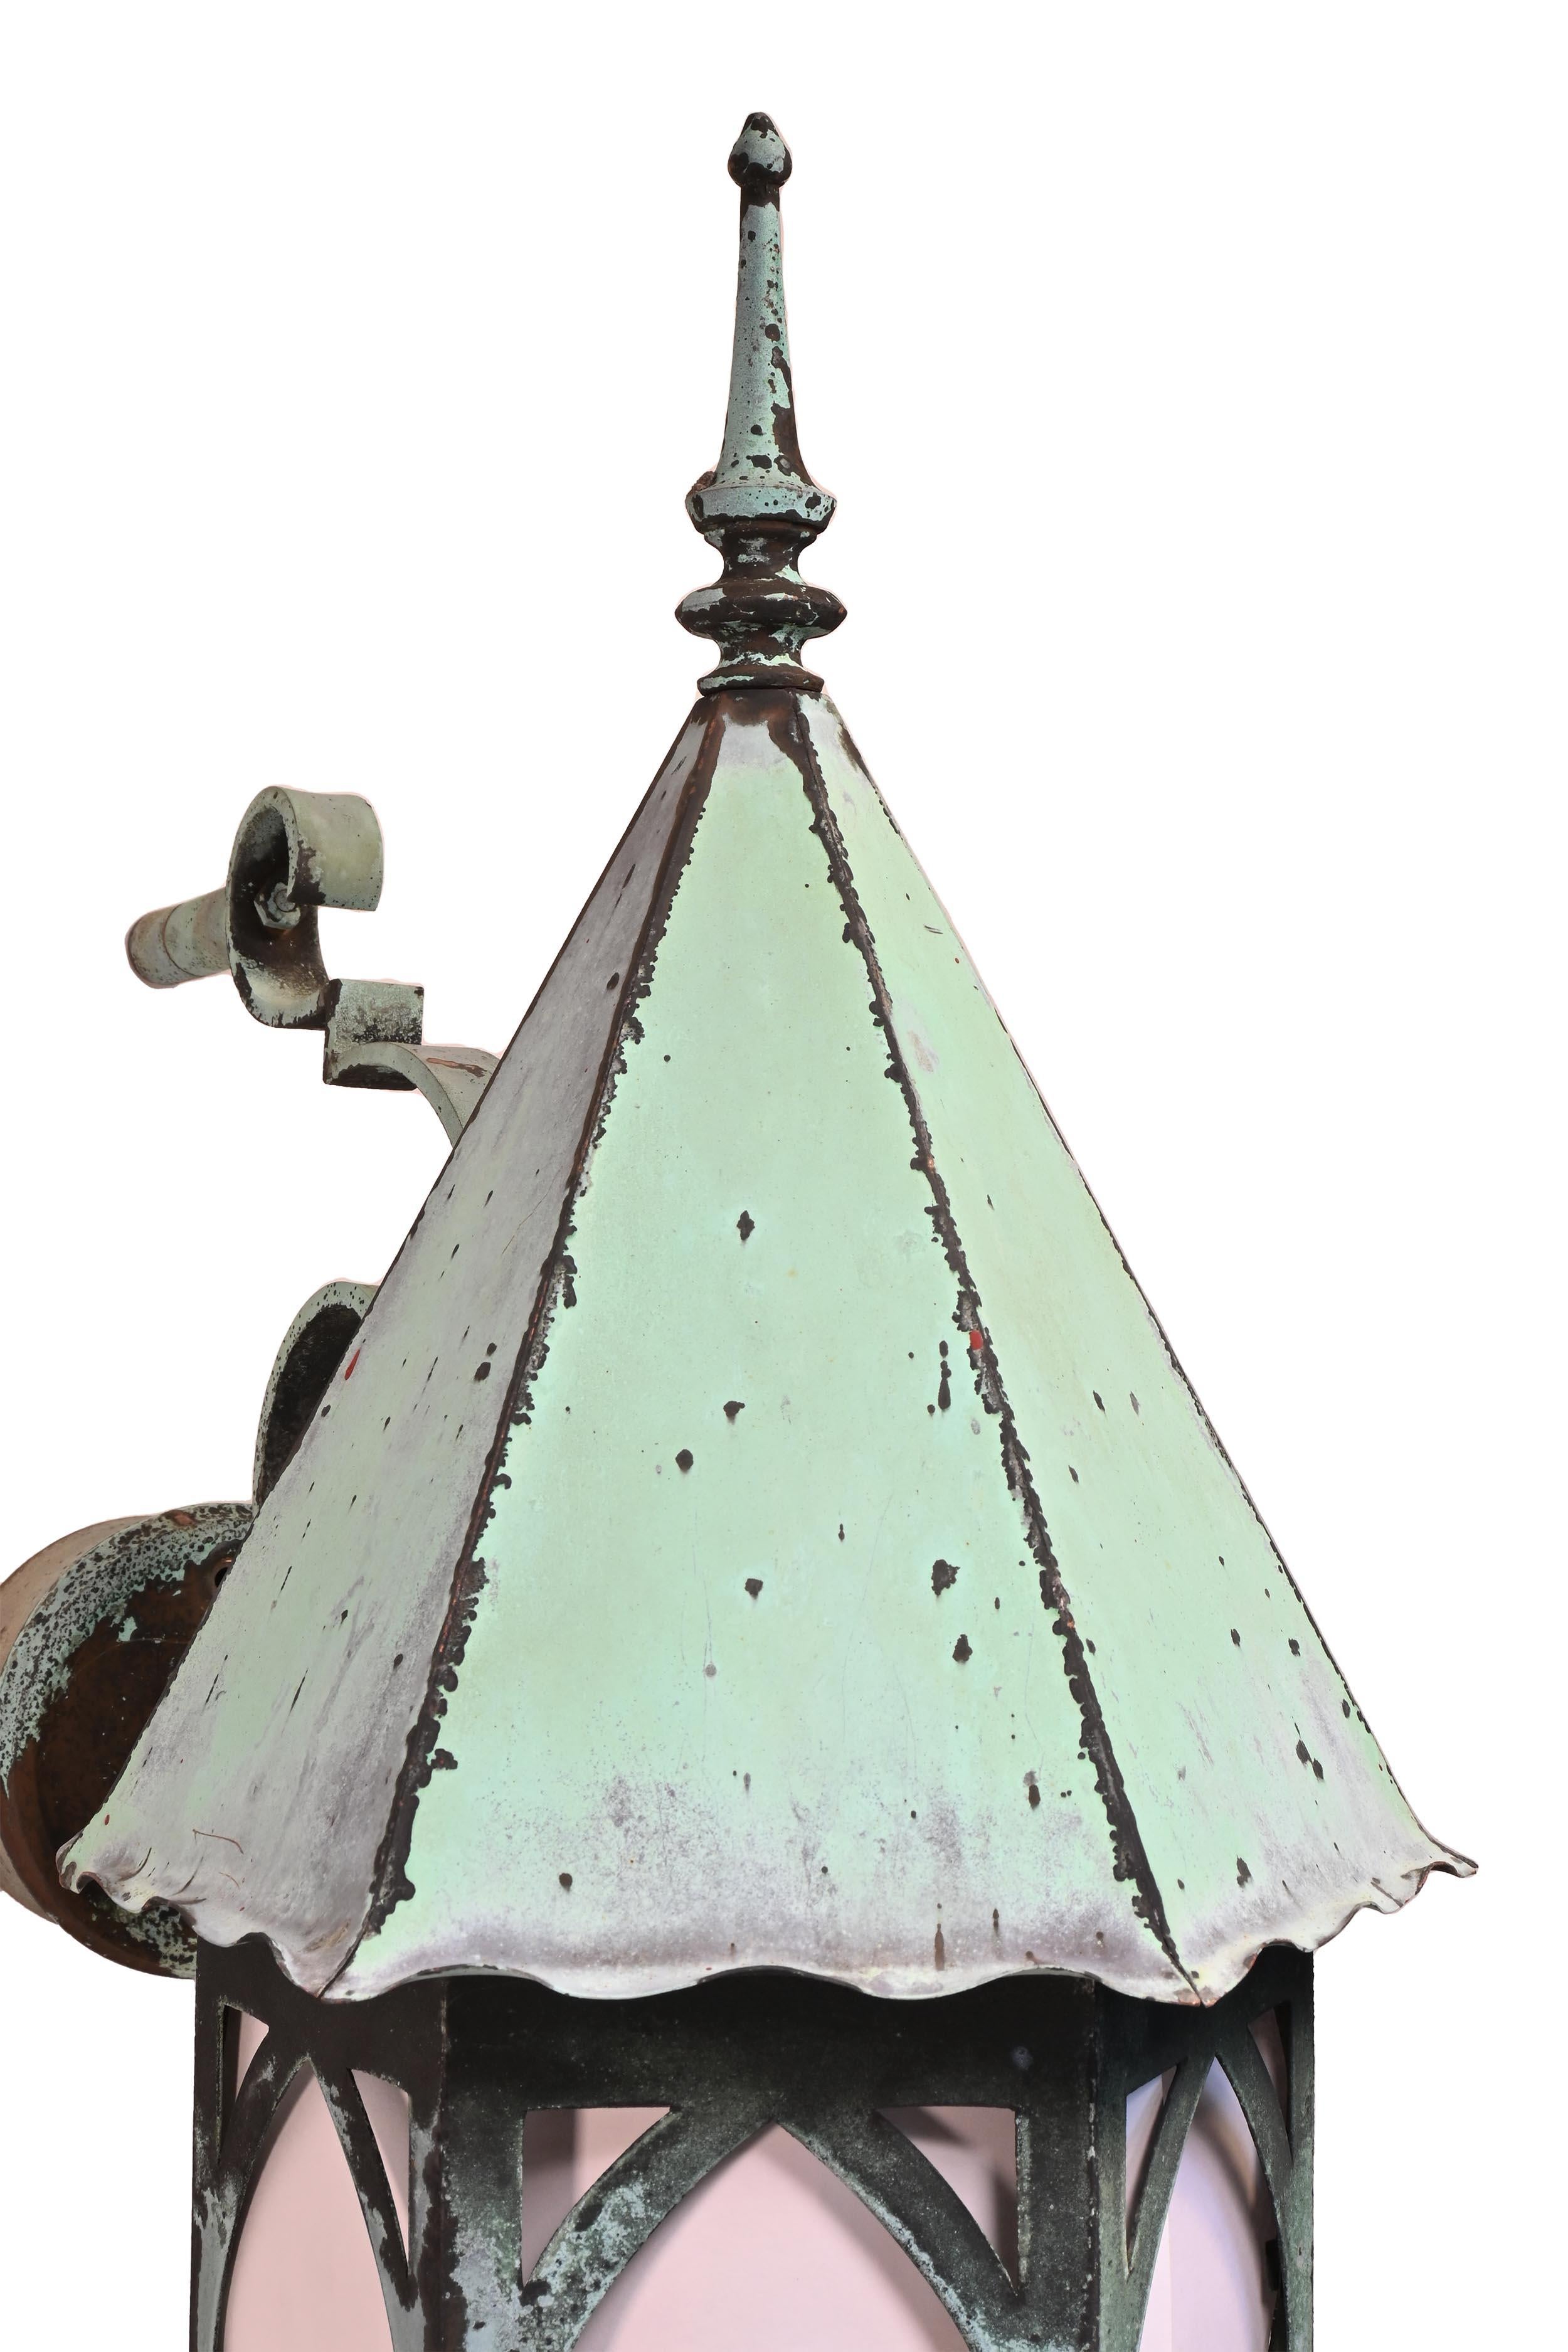 Hand-Crafted Tall Gothic Steeple Top Entrance Sconces Copper Verdigris Patina For Sale